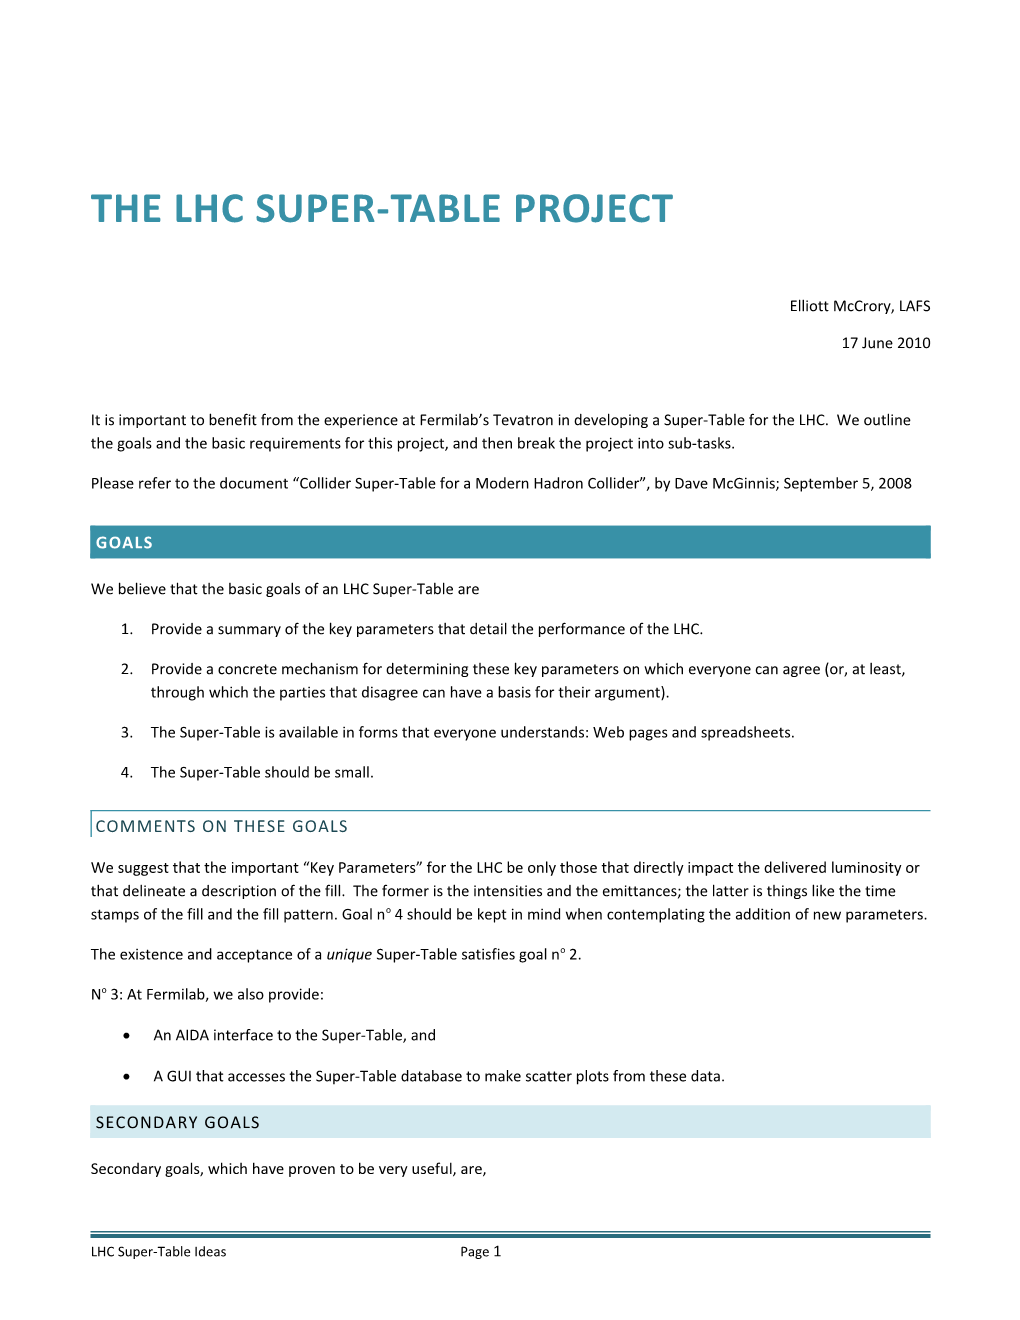 The LHC Super-Table Project